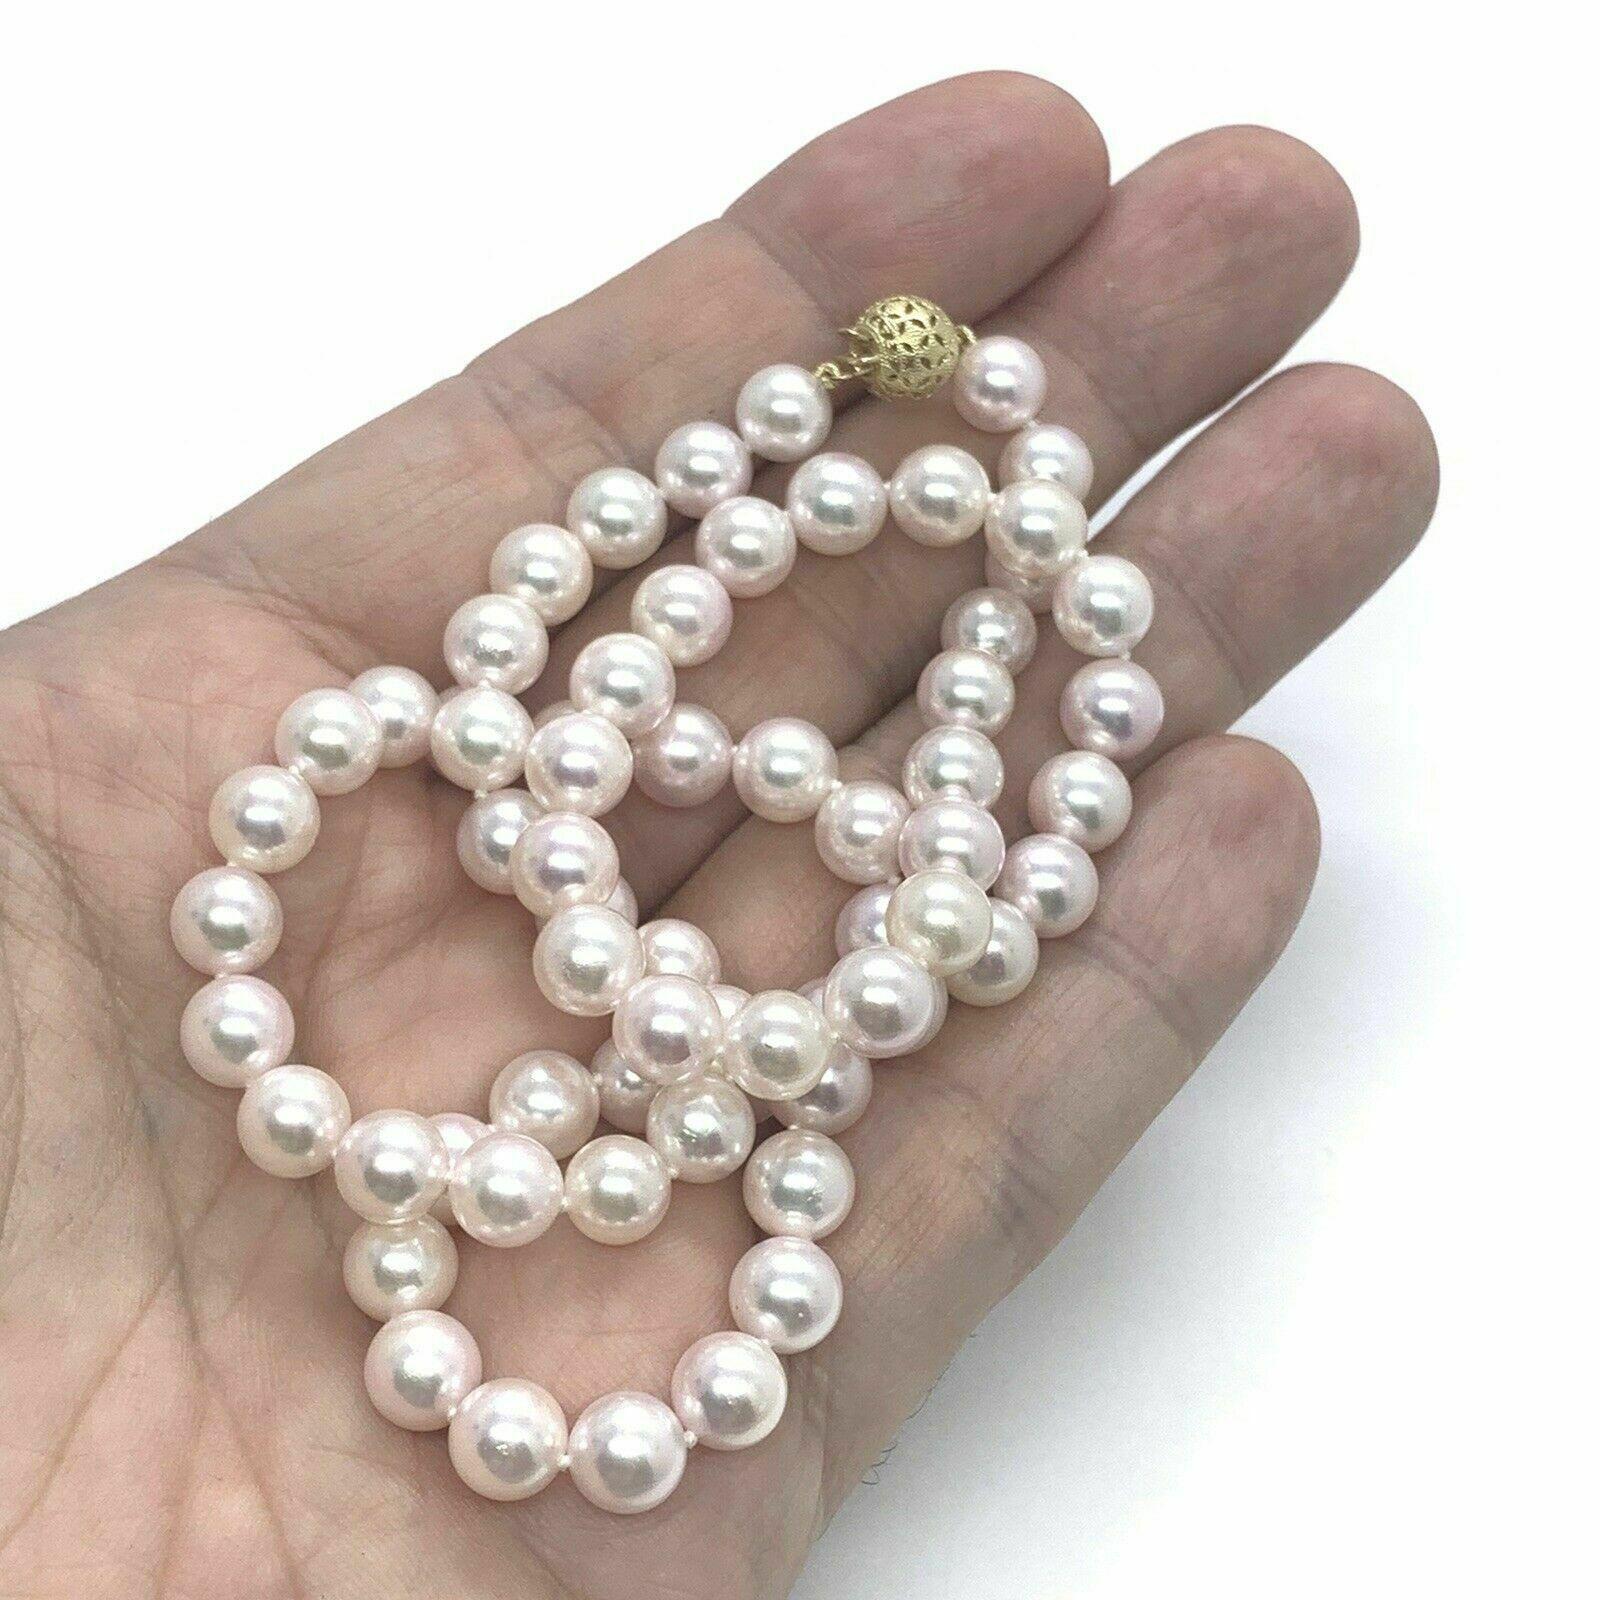 Certified $4,950 Unique High Fashion Authentic Lady's Fine Akoya Pearl 14 Kt Gold. 
This is a One of a Kind Unique Custom Made Glamorous Piece of Jewelry!!

Nothing says, “I Love ❤️ you” more than Diamonds and Pearls

Gemological Appraisal